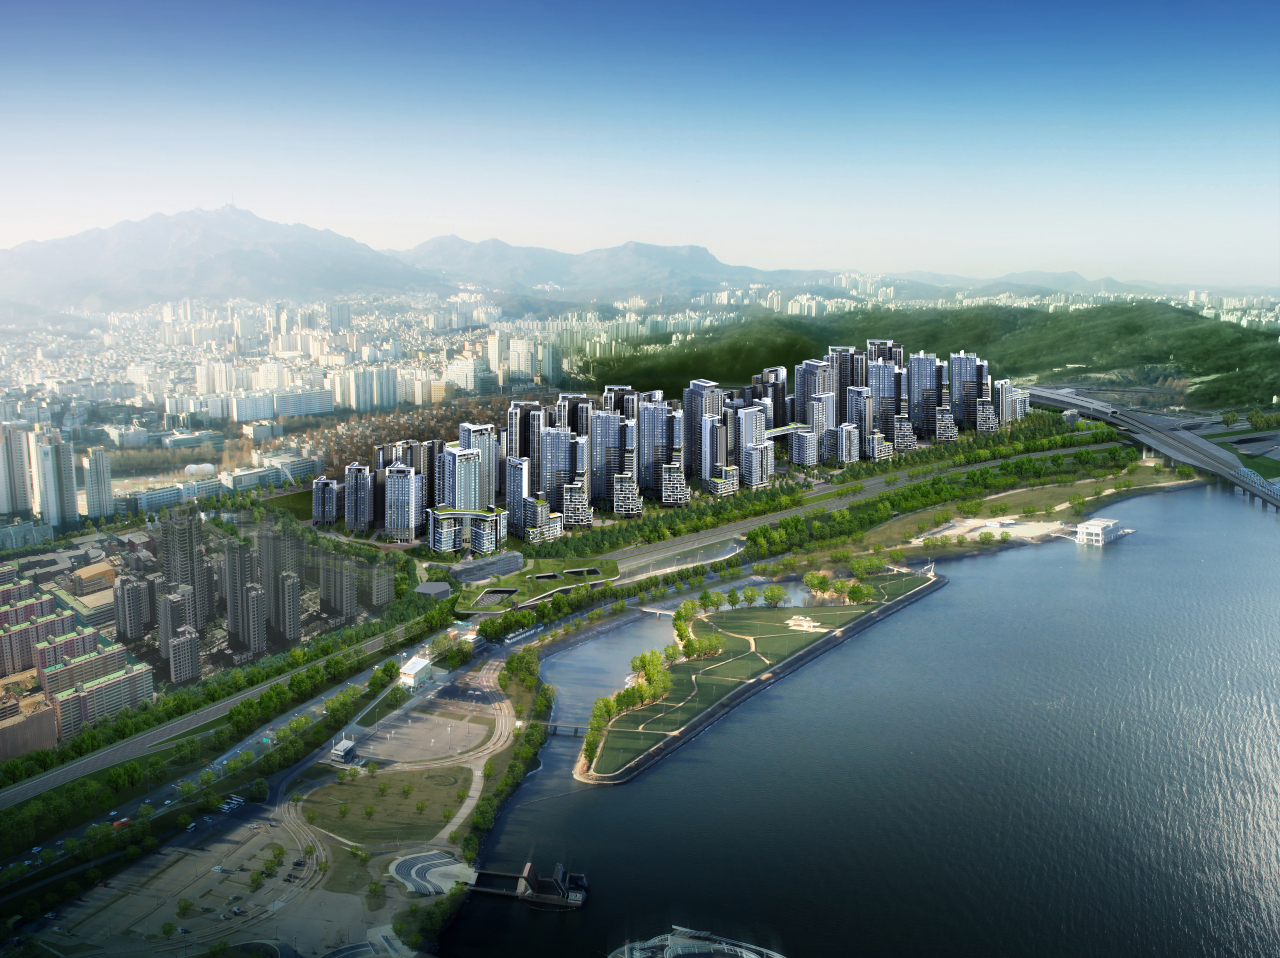 A rendered image of the reconstructed Banpo Jugong apartment complex 1 in Seocho-gu, southern Seoul. (Seoul City)